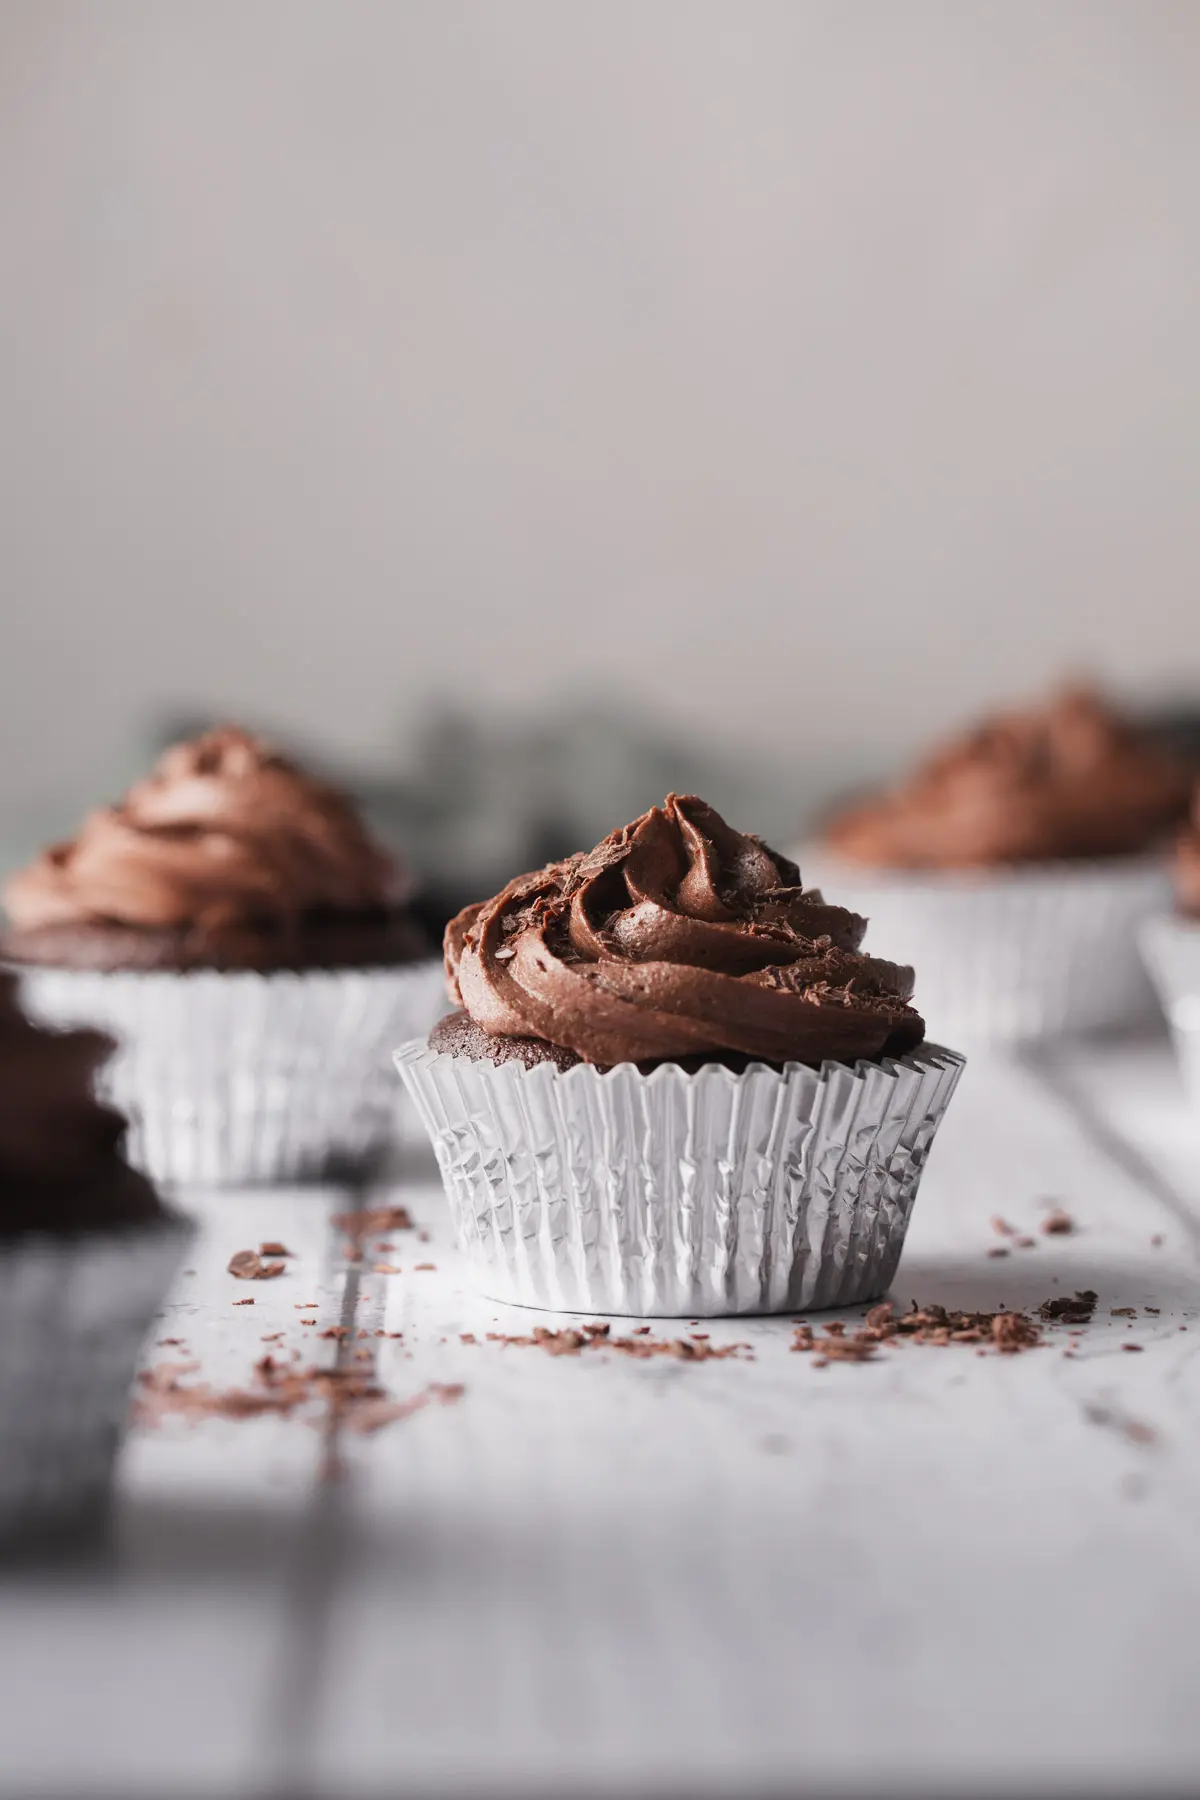 Chocolate cupcakes in silver holders sitting on a white wooden table.